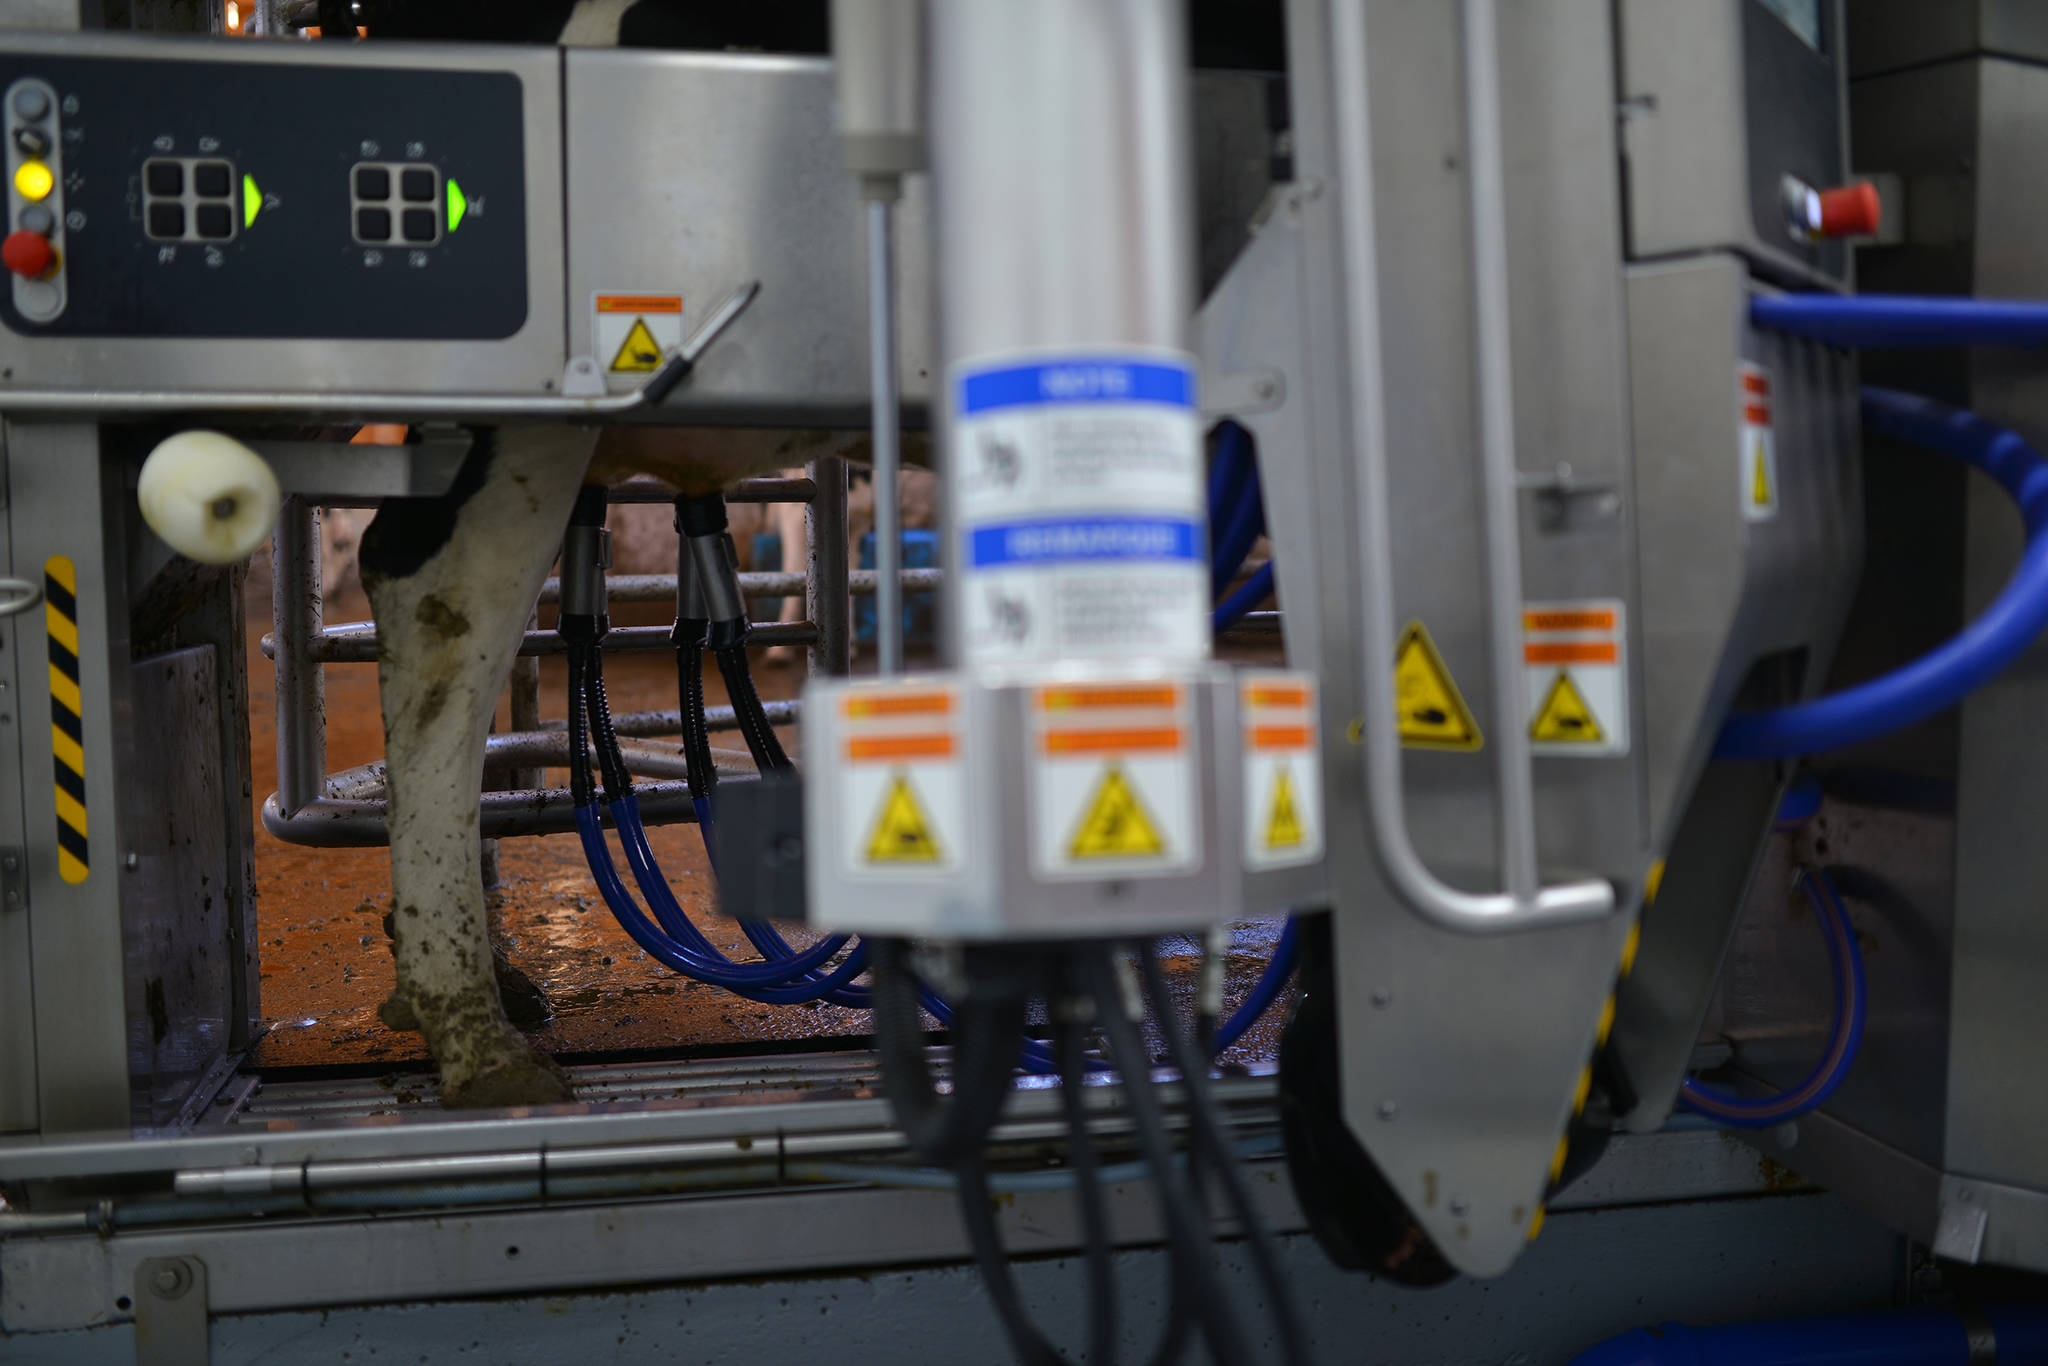 A DeLaval robotic milker has been installed at Tazo Farms in Falkland, among its many features being the ability to inform farmers of any health-related concerns identified during the milking process. The robot knows which cows have been milked, and prevents animals from being milked too often, or not enough. (Phil McLachlan - Black Press Media)